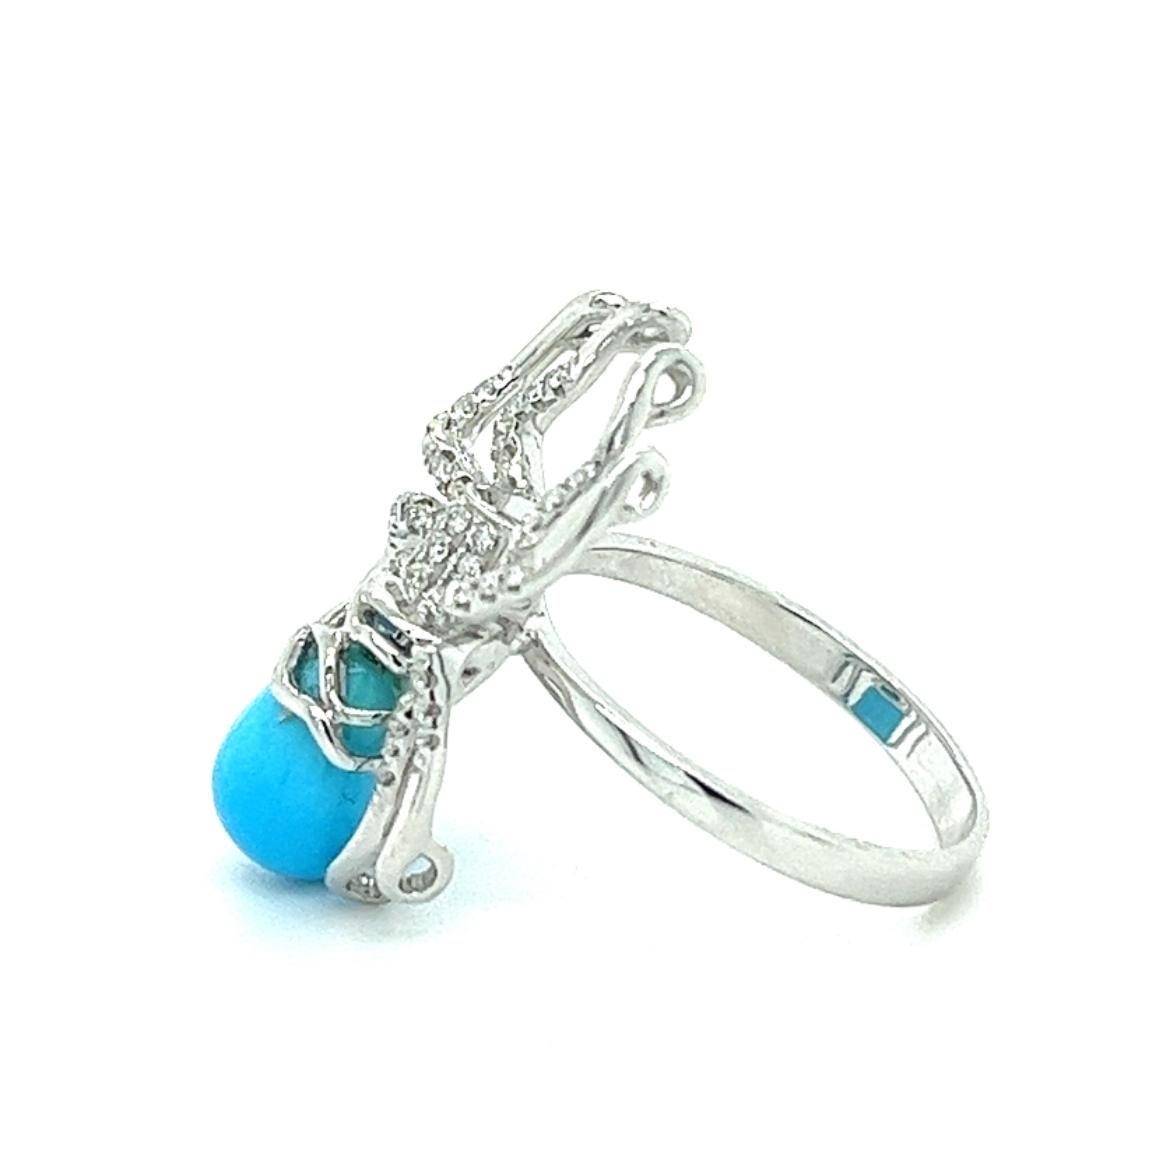 18K White Gold Spider Ring with
Diamonds & Turquoise
56 Diamonds - 0.24 CT 
1 Turquoise - 3.17 CT 
18K White Gold - 4.62 GM

Indulge in the enchanting beauty of the Spider Ring, a symbol of strength and grace. Let the turquoise gemstone captivate